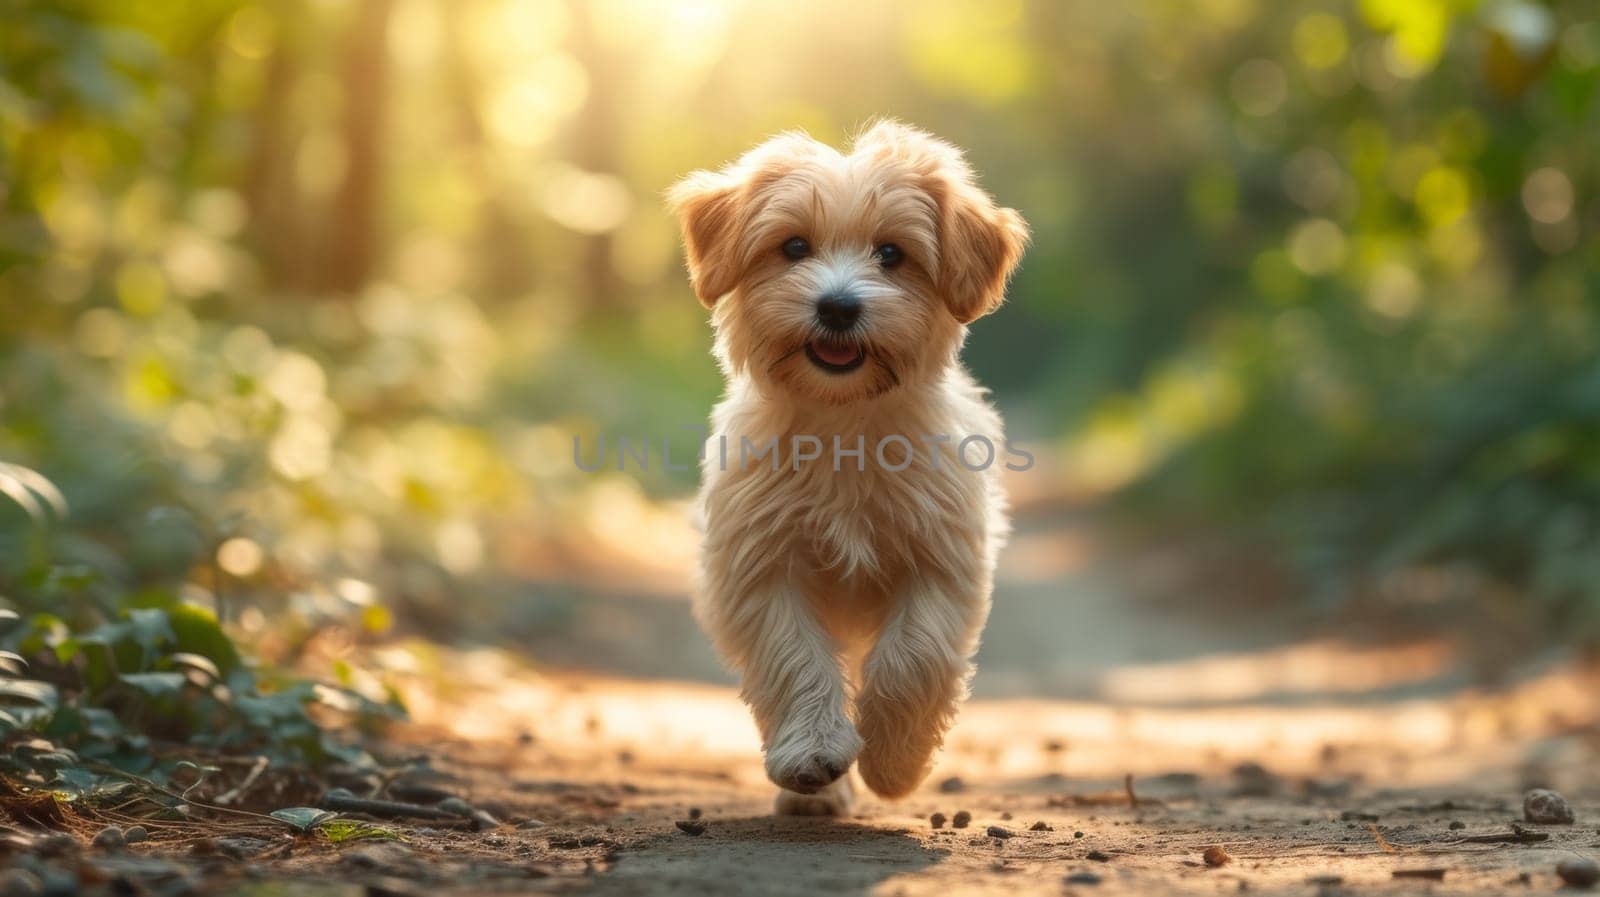 A small dog running on a dirt road in the woods